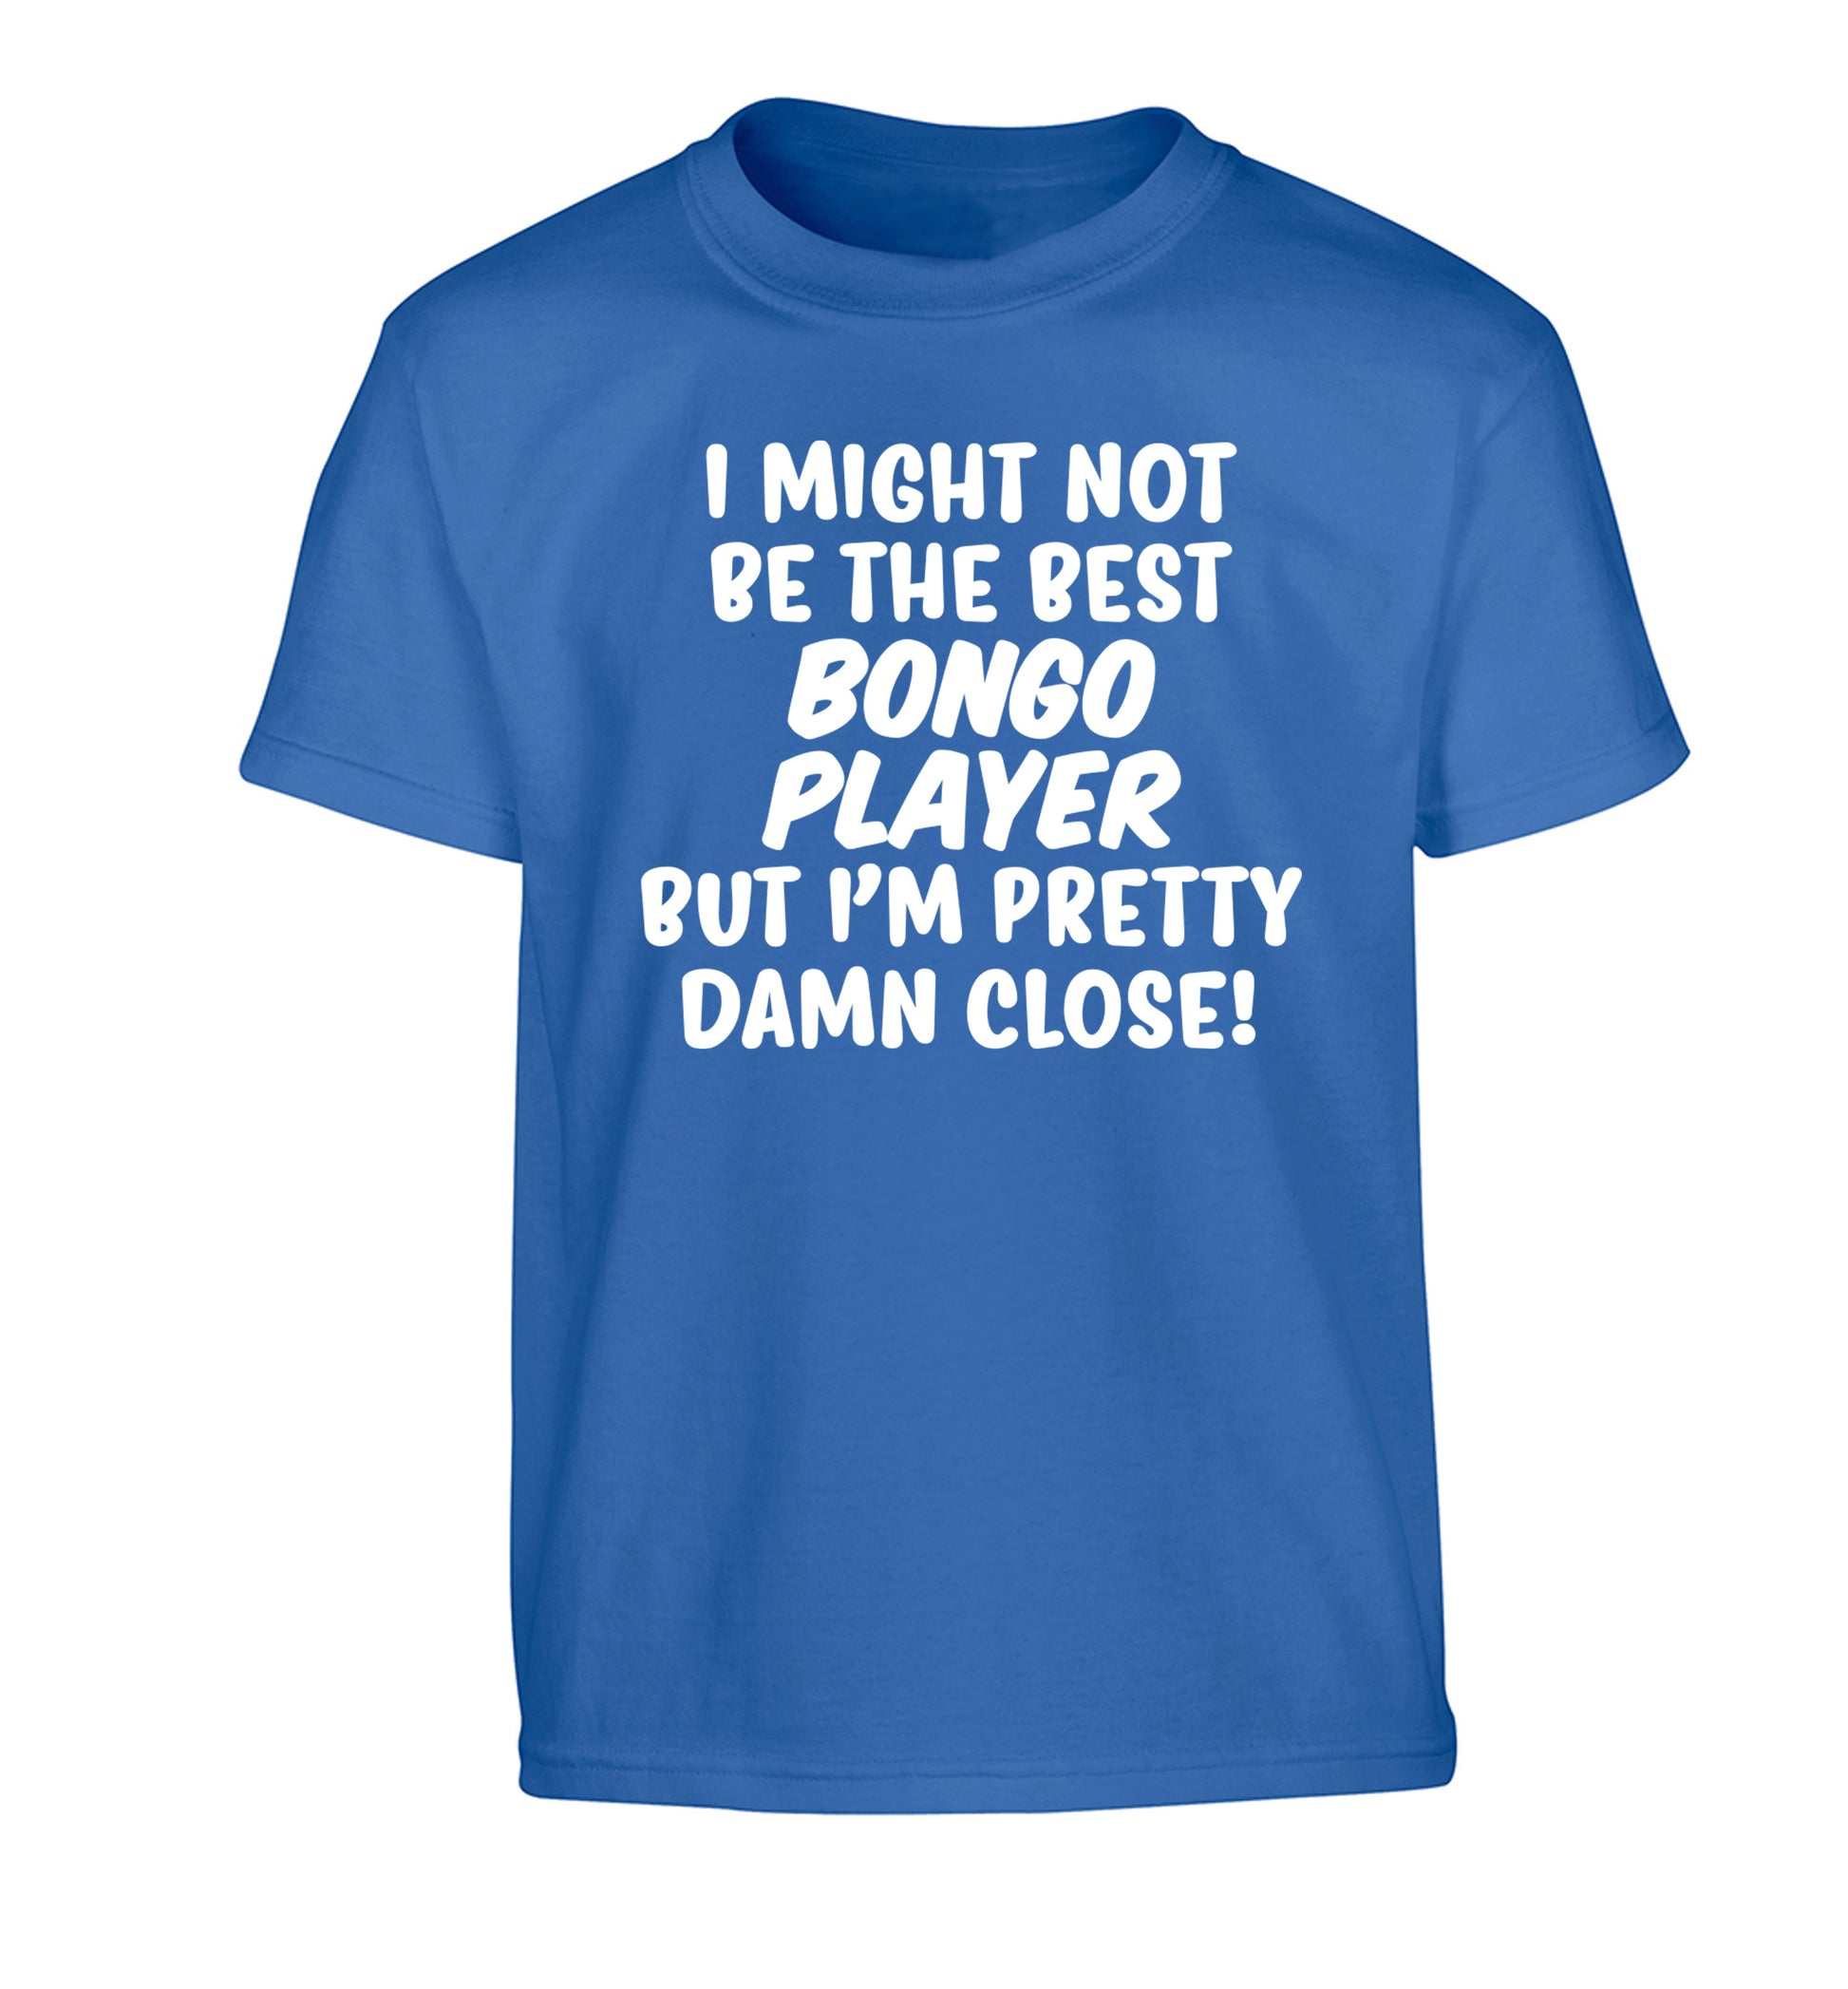 I might not be the best bongo player but I'm pretty close! Children's blue Tshirt 12-14 Years